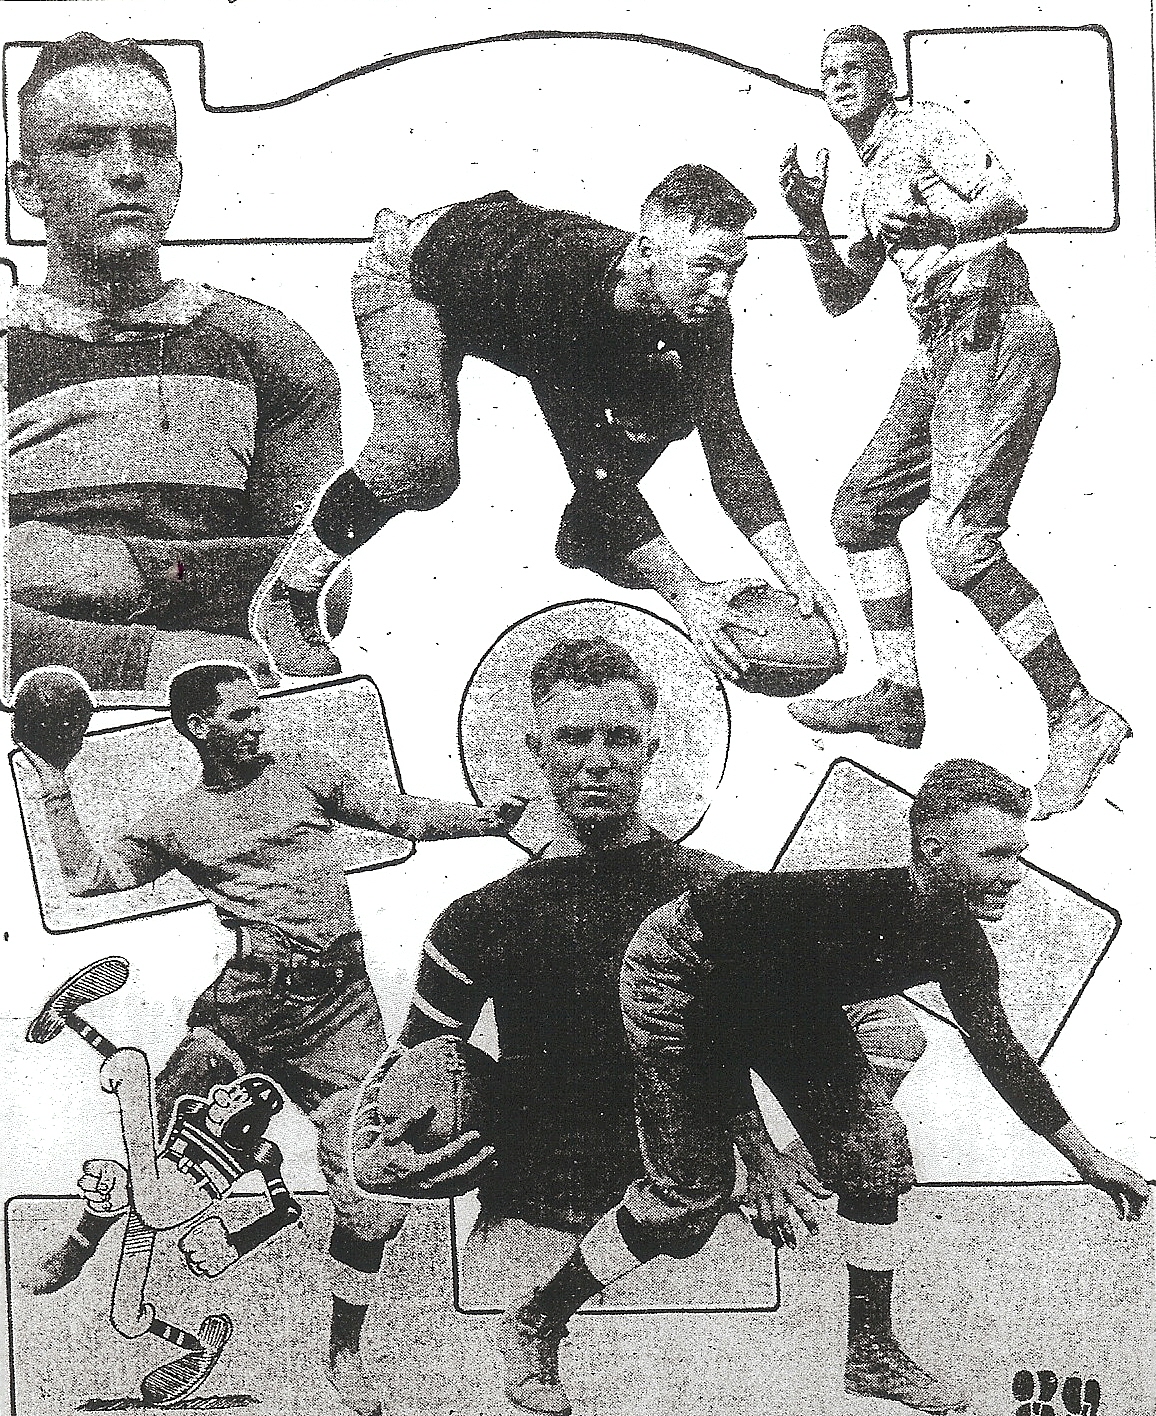 San Diego stalwarts (clockwise from upper left): John Hunter, Howard Williams, Lawrence Hall, Roy Richert, coach John Perry, and Richard Knowles.